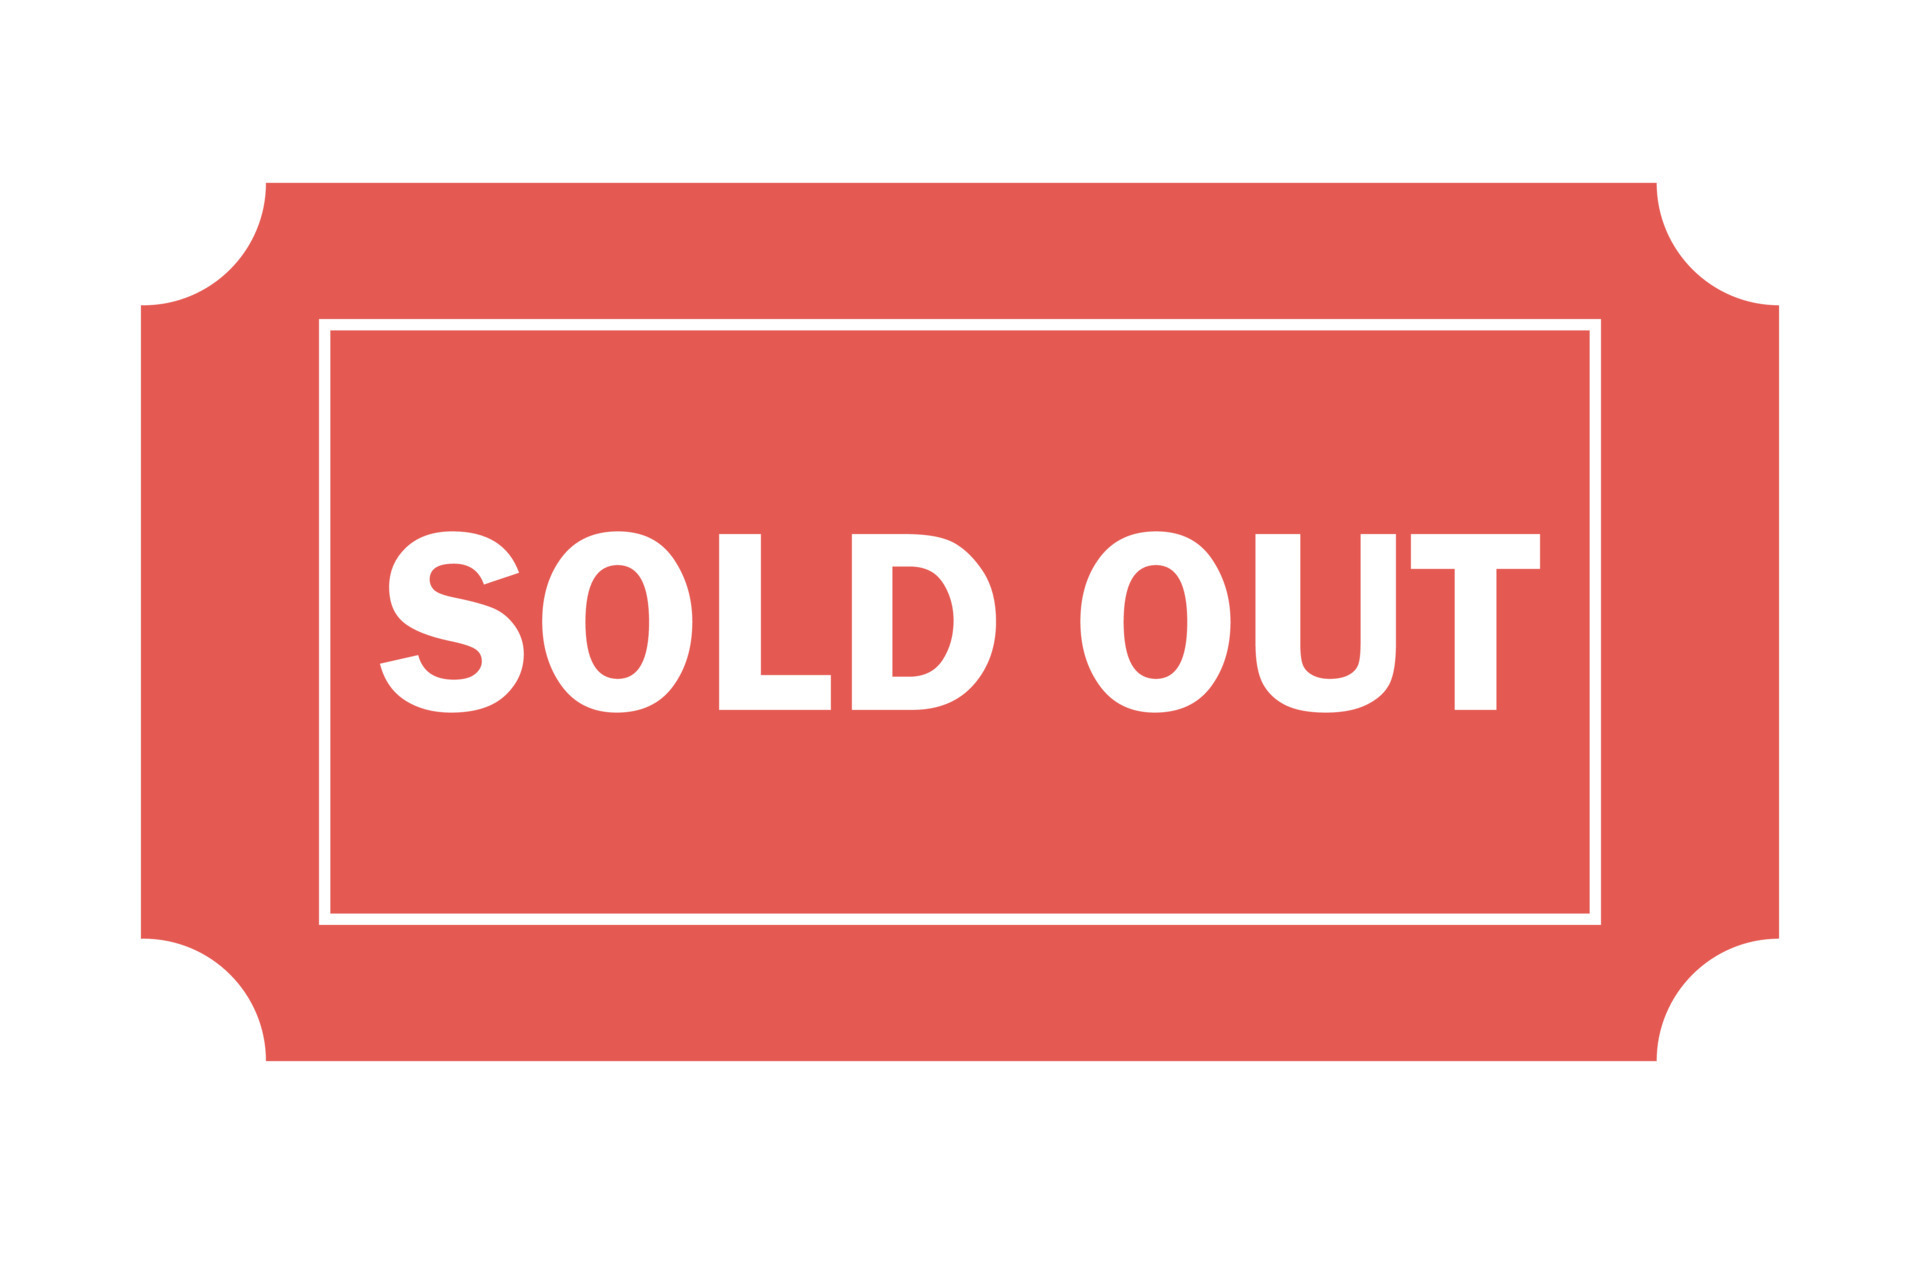 Sold Out red rectangular sticker icon. Sold out square symbol